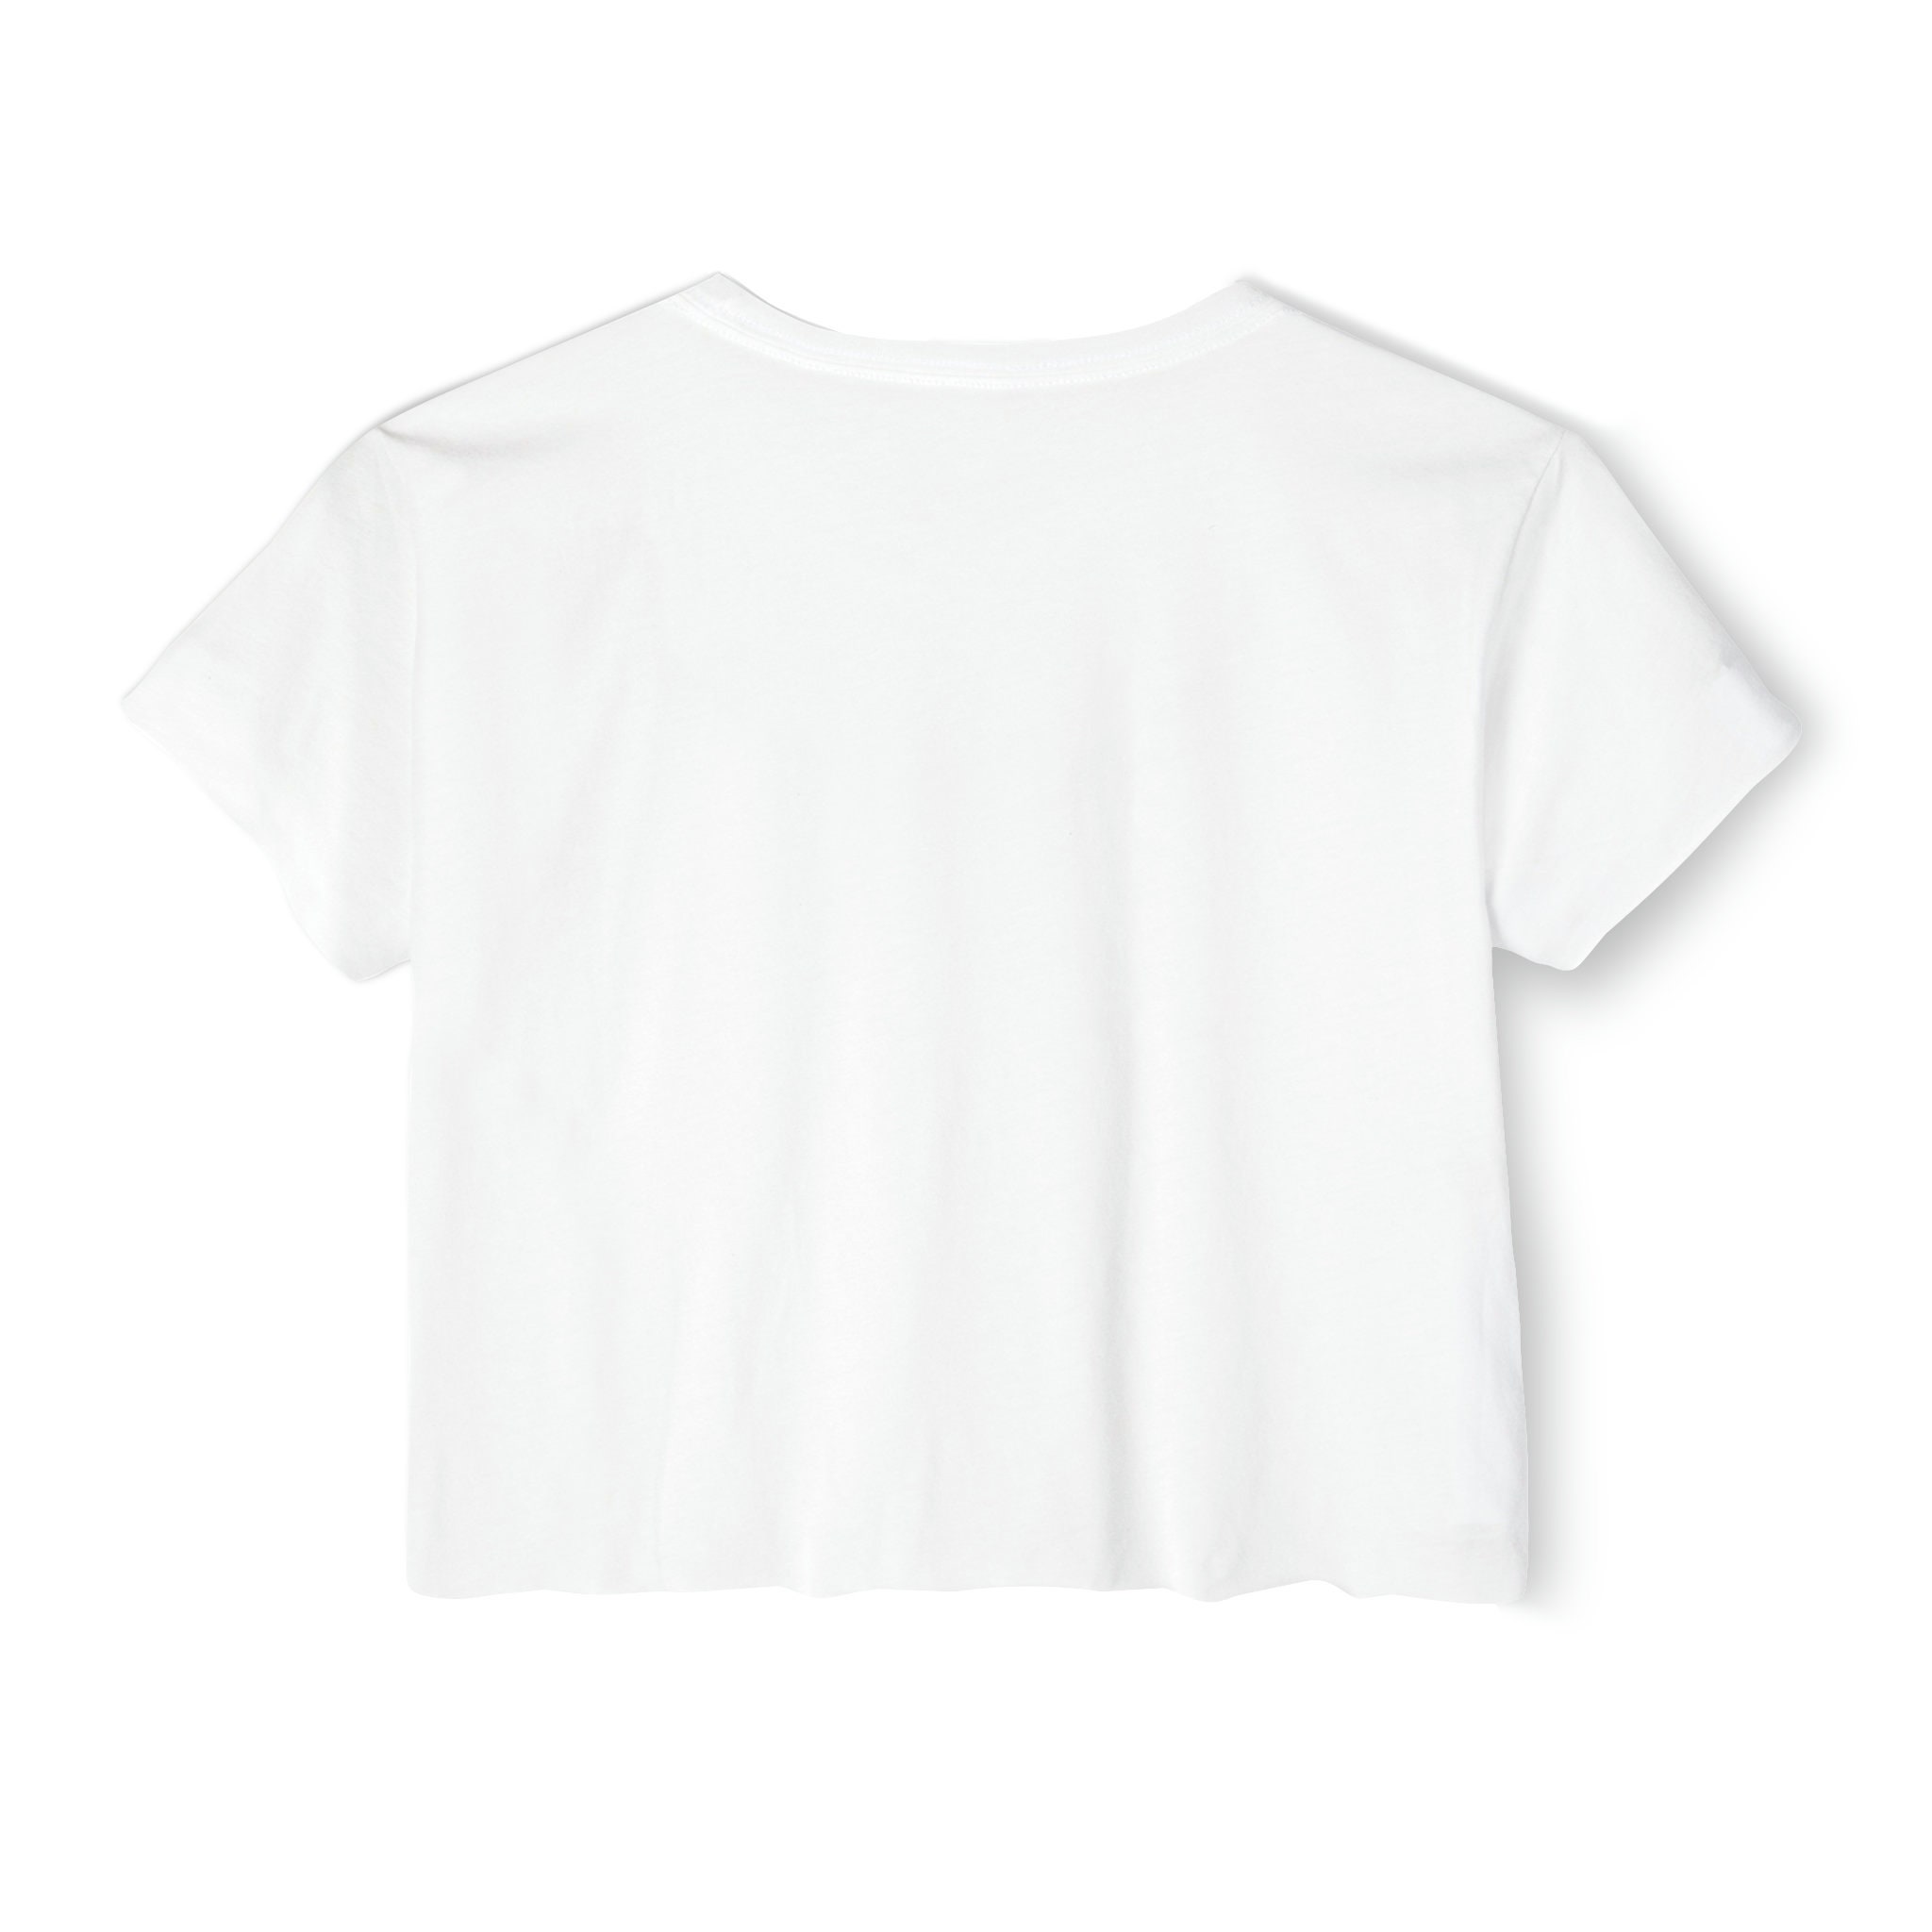 Lover Taylor Crop Top Shirt, Taylor Flowy Cropped Tee